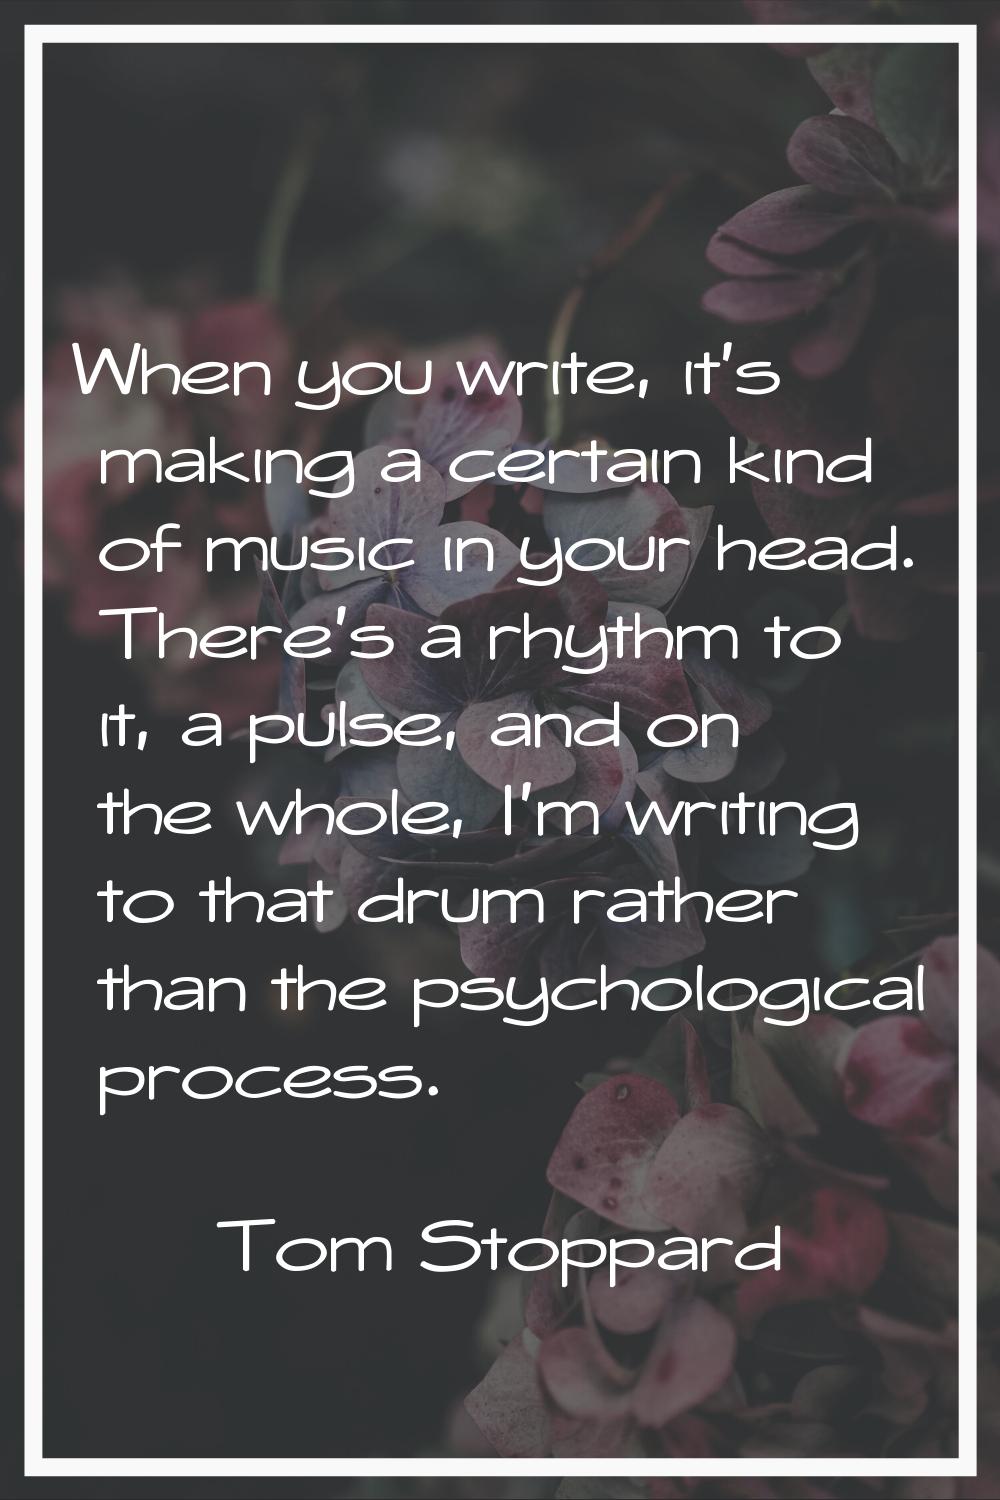 When you write, it's making a certain kind of music in your head. There's a rhythm to it, a pulse, 